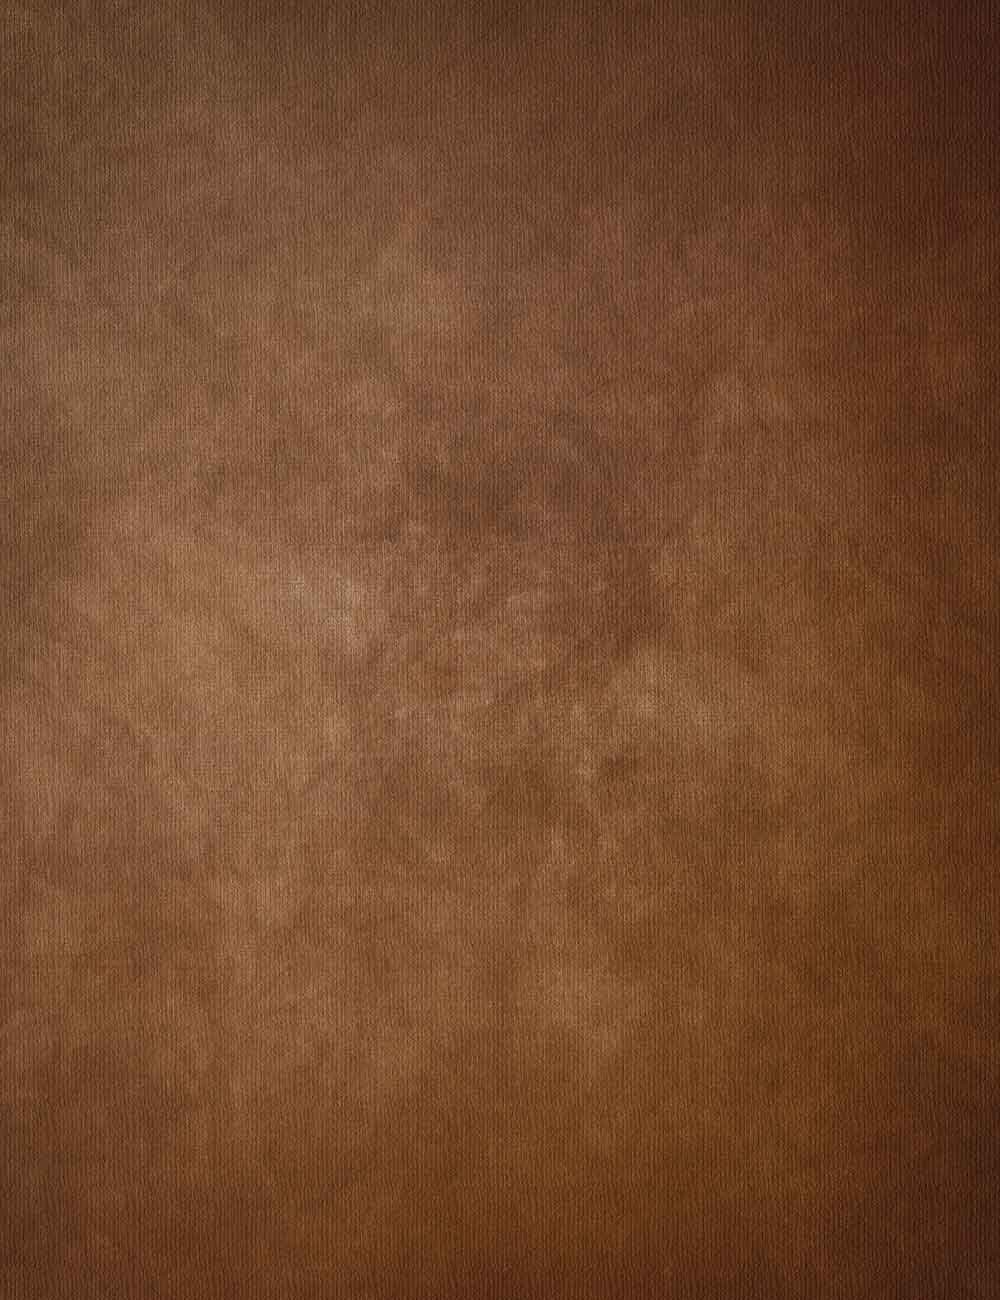 Abstract Brown Old Master Canvas Texture Backdrop For Studio Photo Shopbackdrop